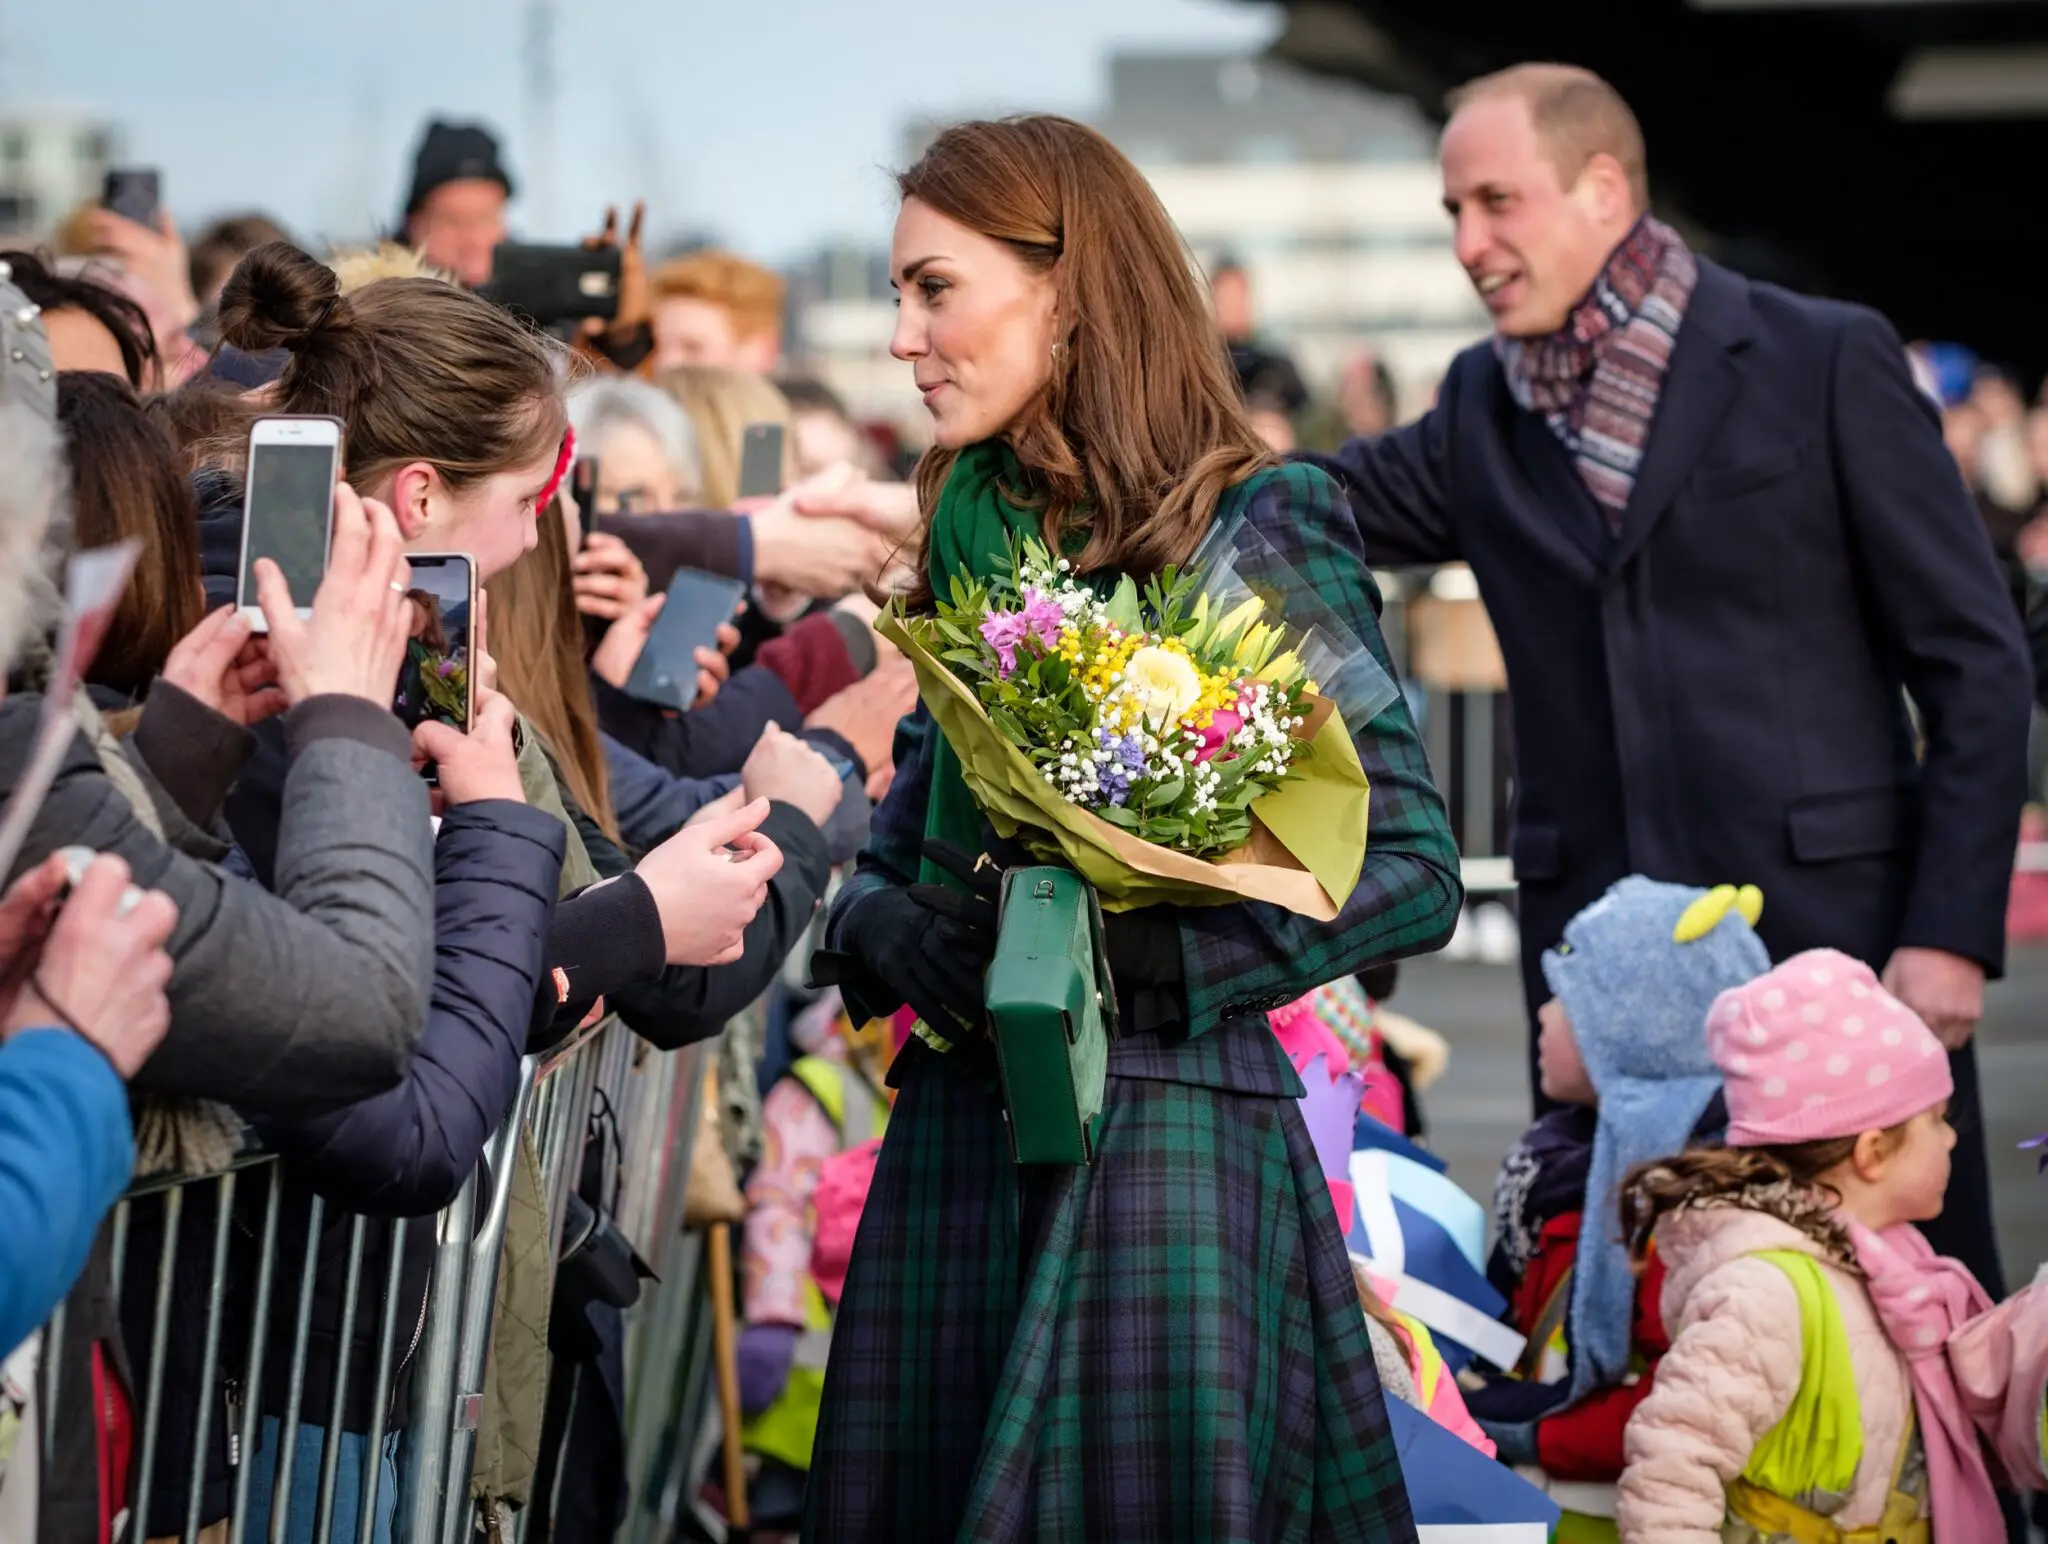 The Royal Train Tour of The Duke and Duchess of Cambridge | RegalFille